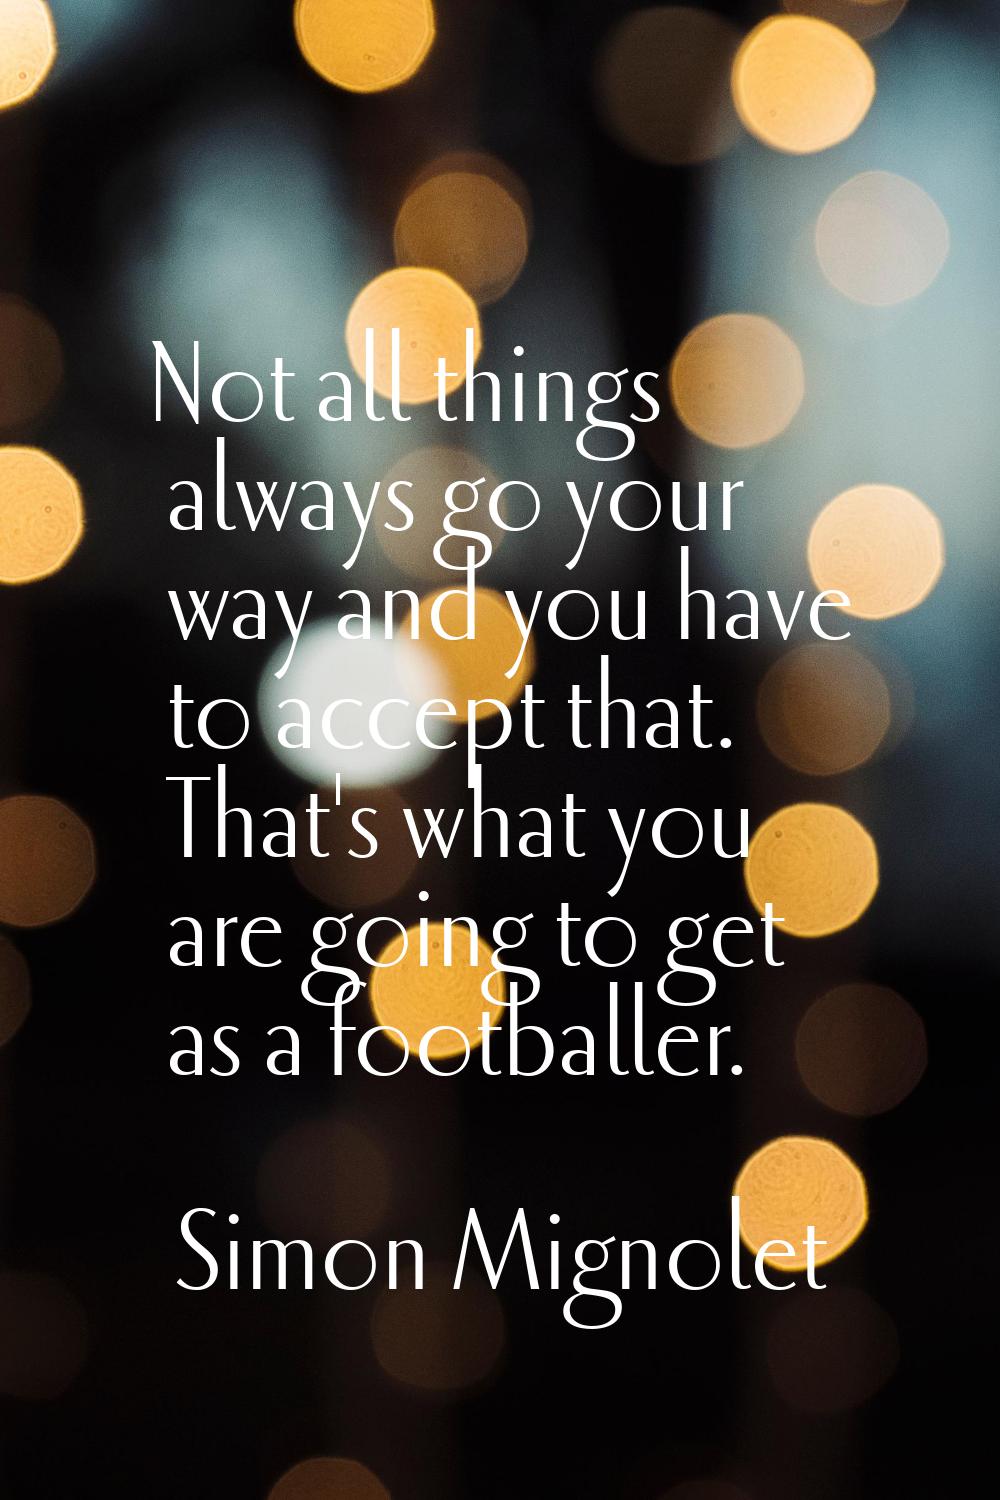 Not all things always go your way and you have to accept that. That's what you are going to get as 